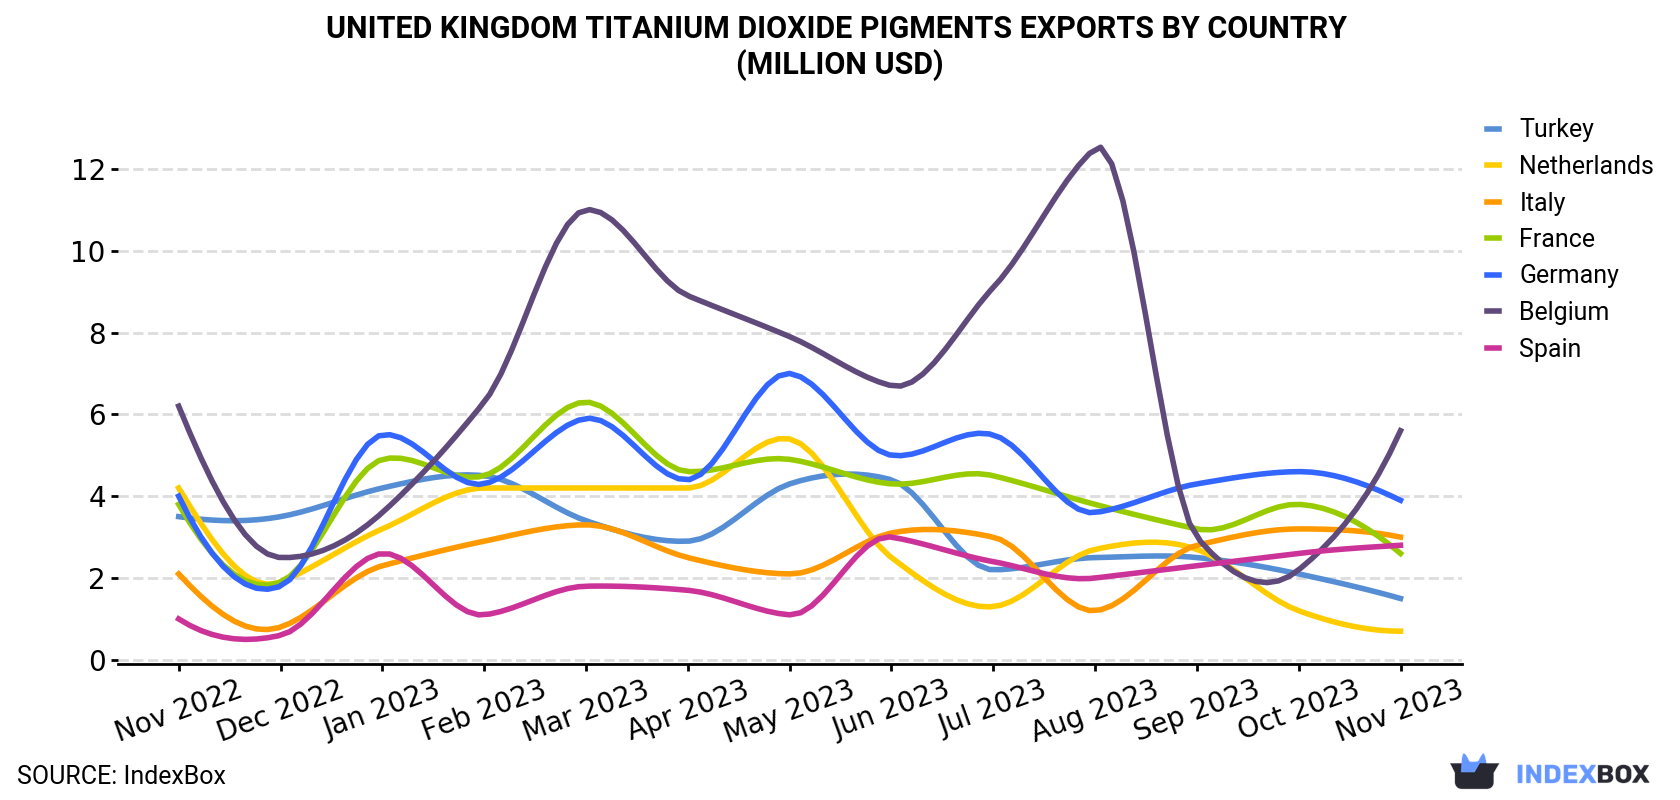 United Kingdom Titanium Dioxide Pigments Exports By Country (Million USD)